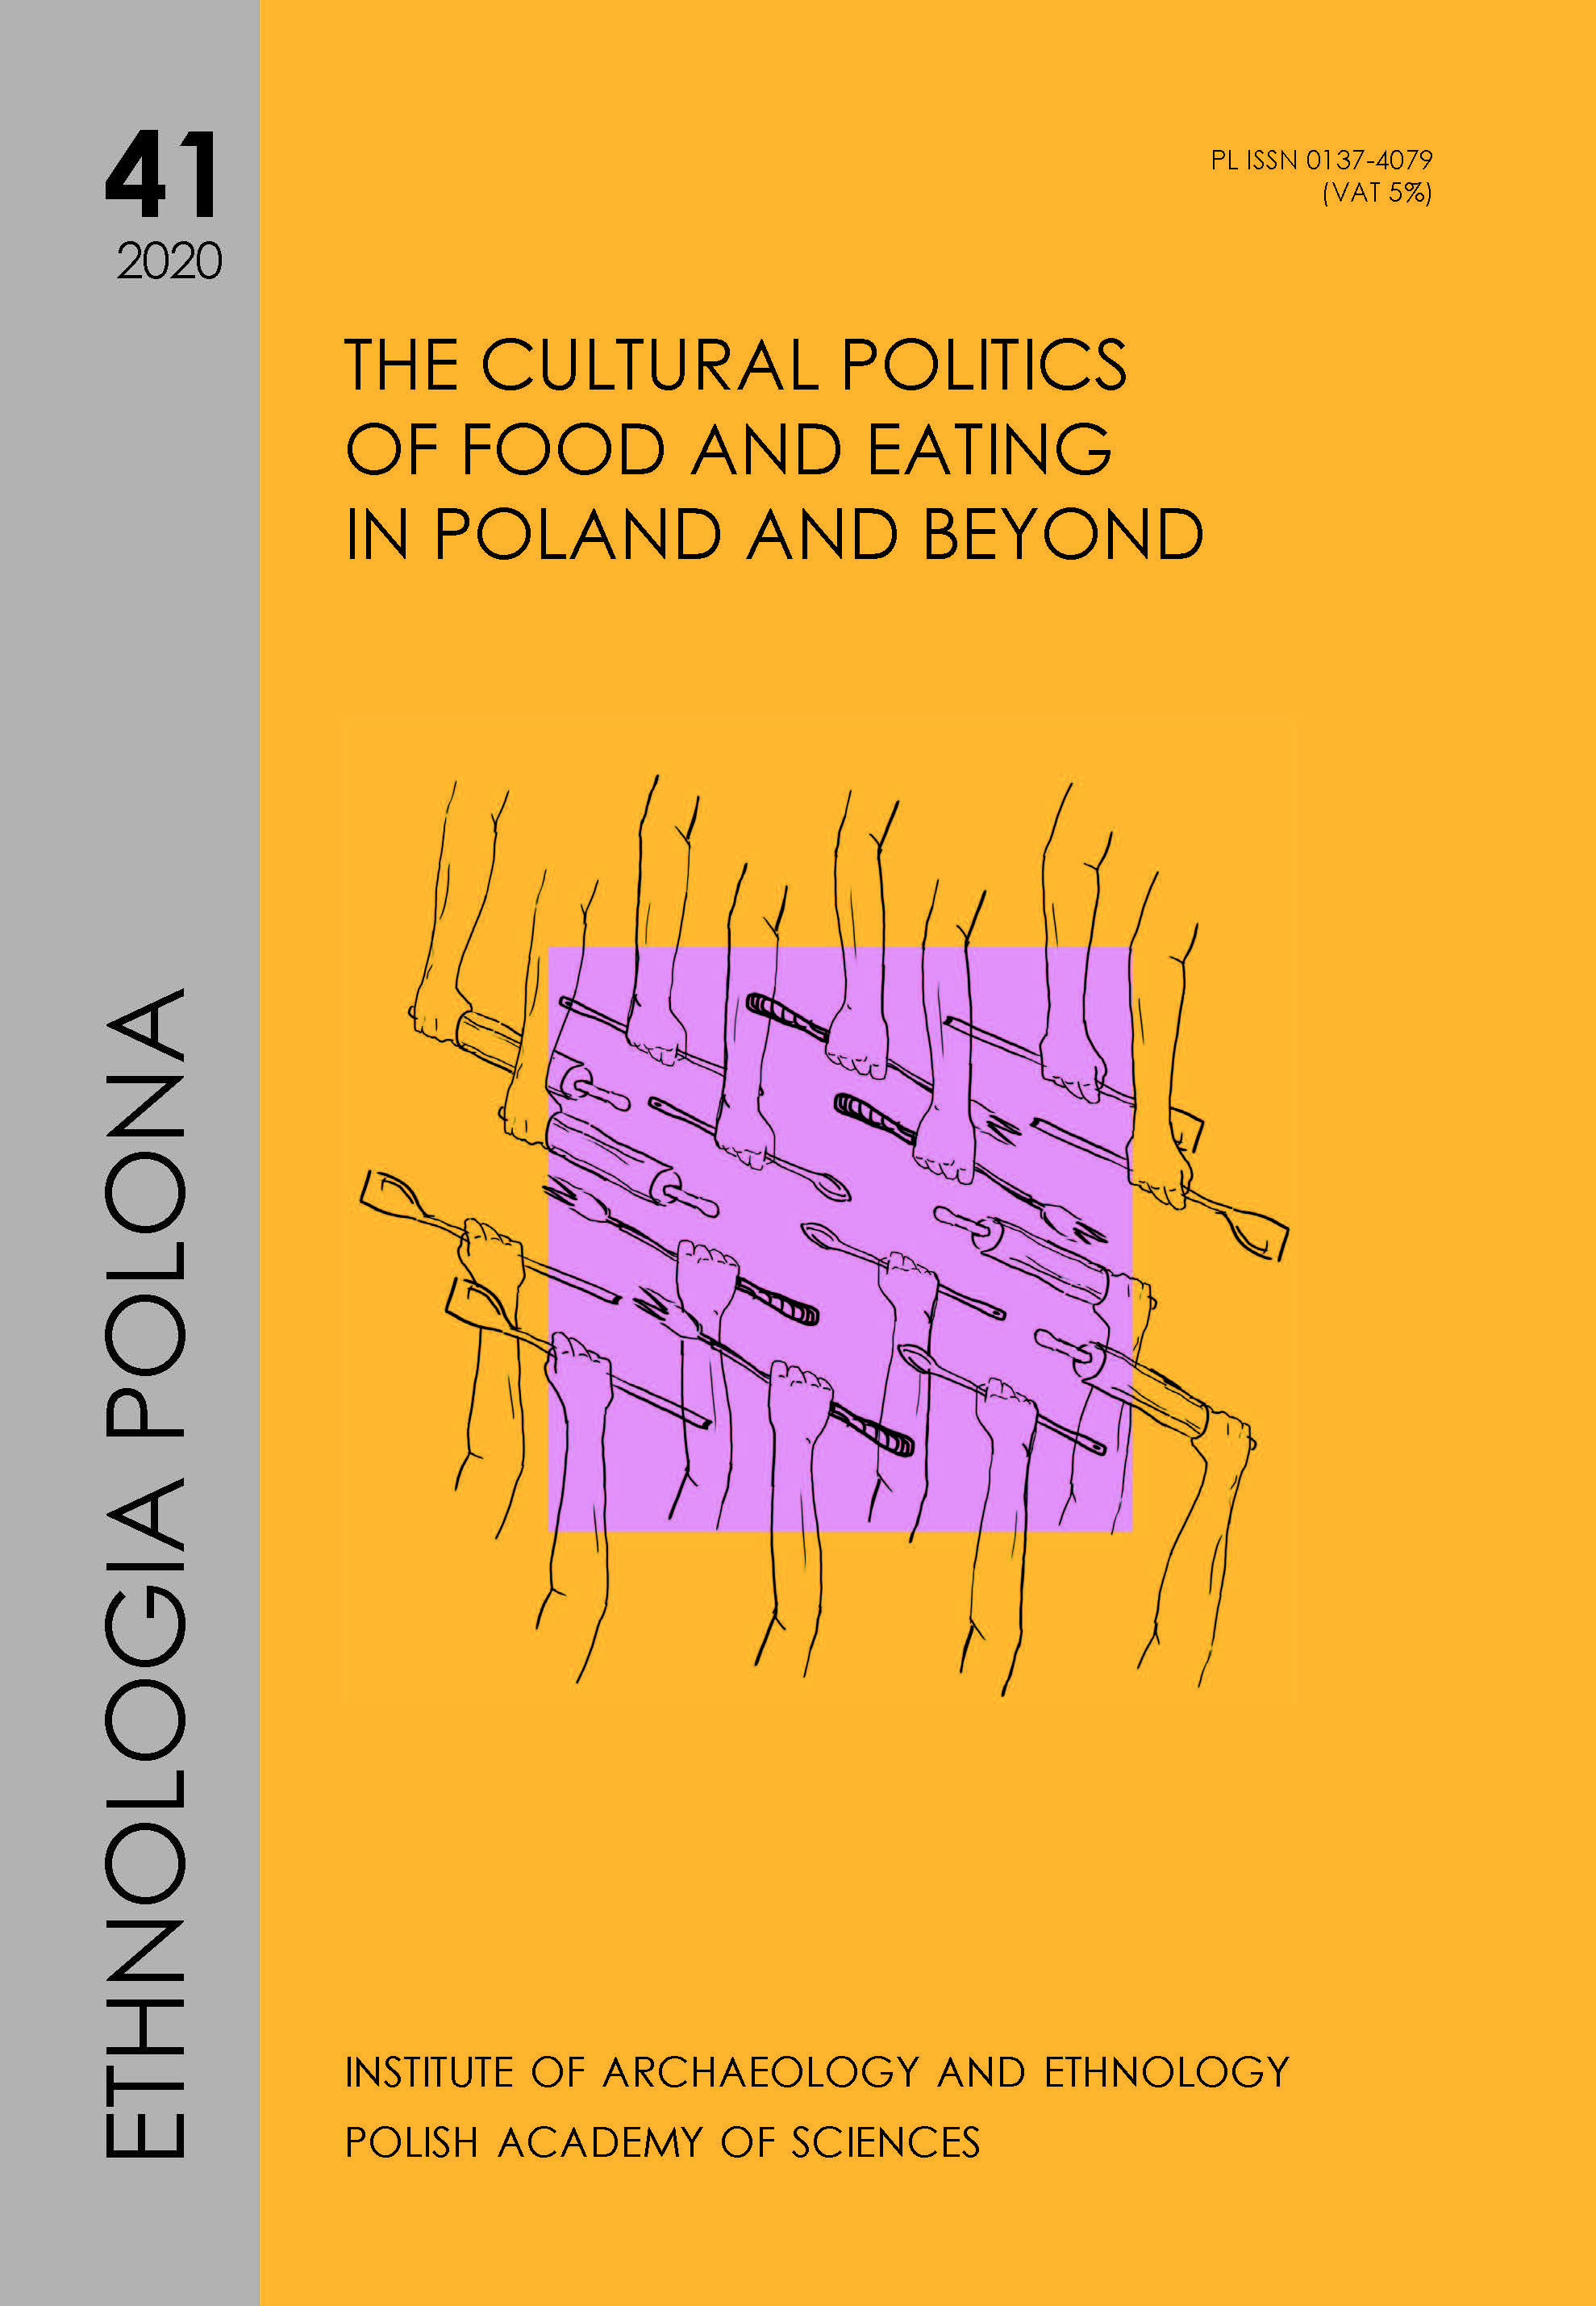 					View Vol. 41 (2020): The cultural politics of food and eating in Poland and beyond 
				